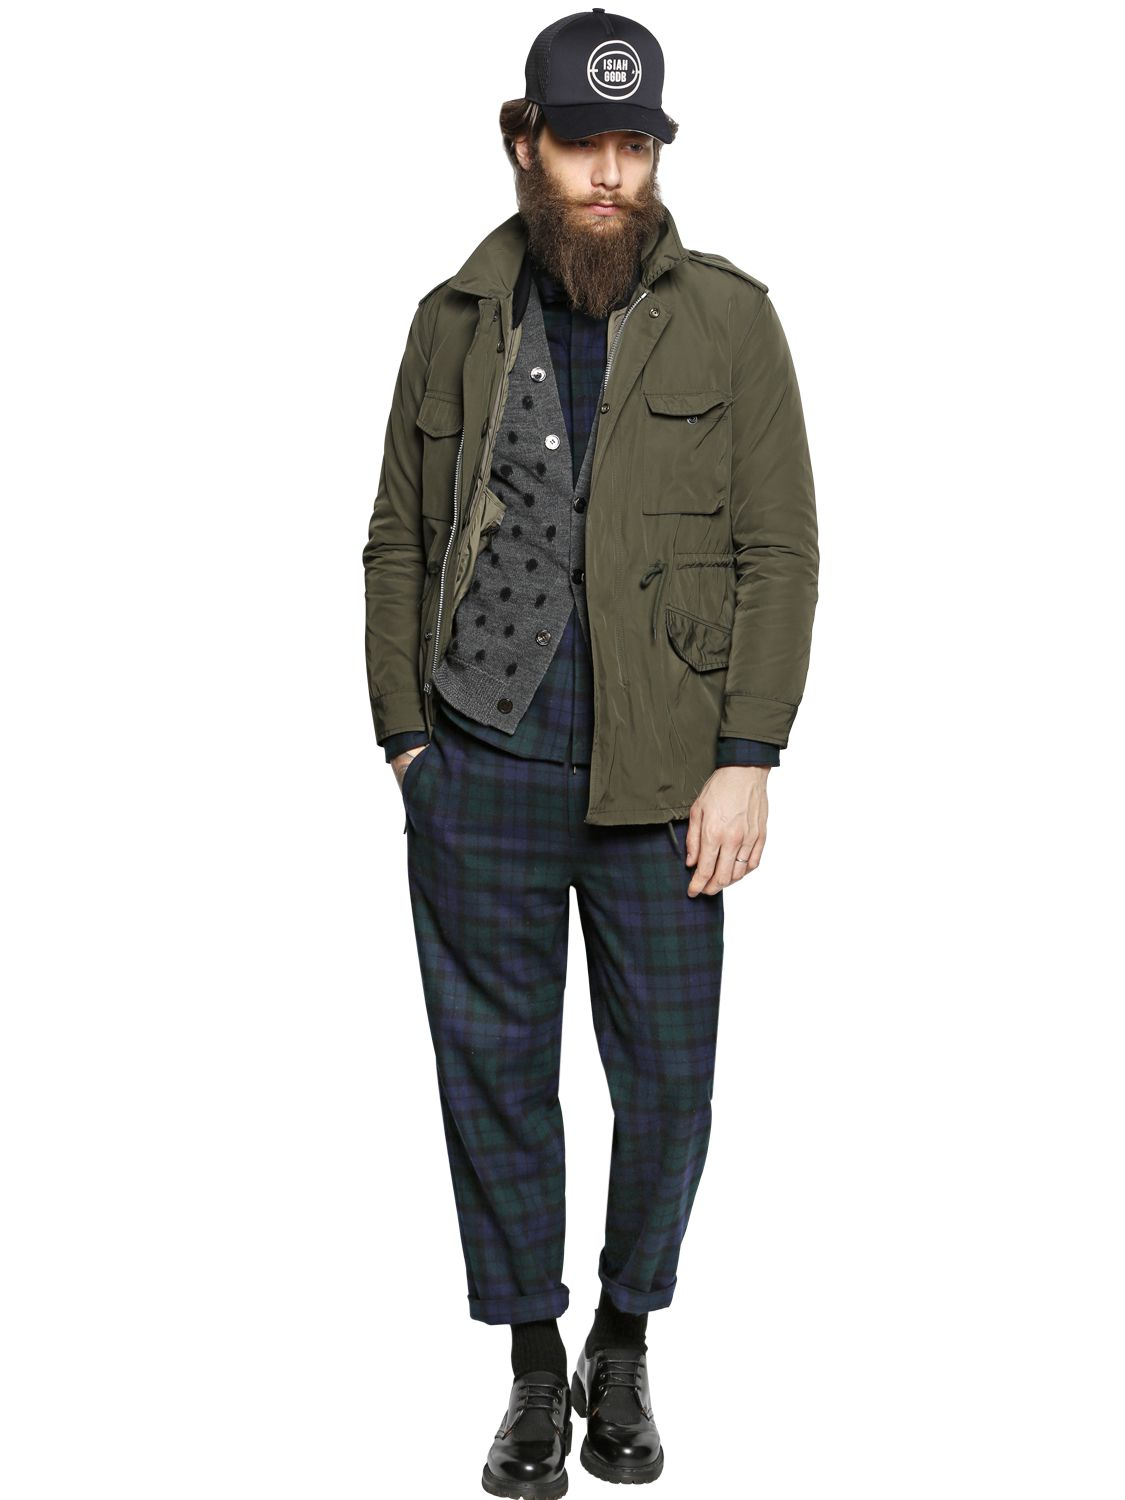 Golden Goose Synthetic Parka & Down Jacket in Military Green (Green) for Men - Lyst